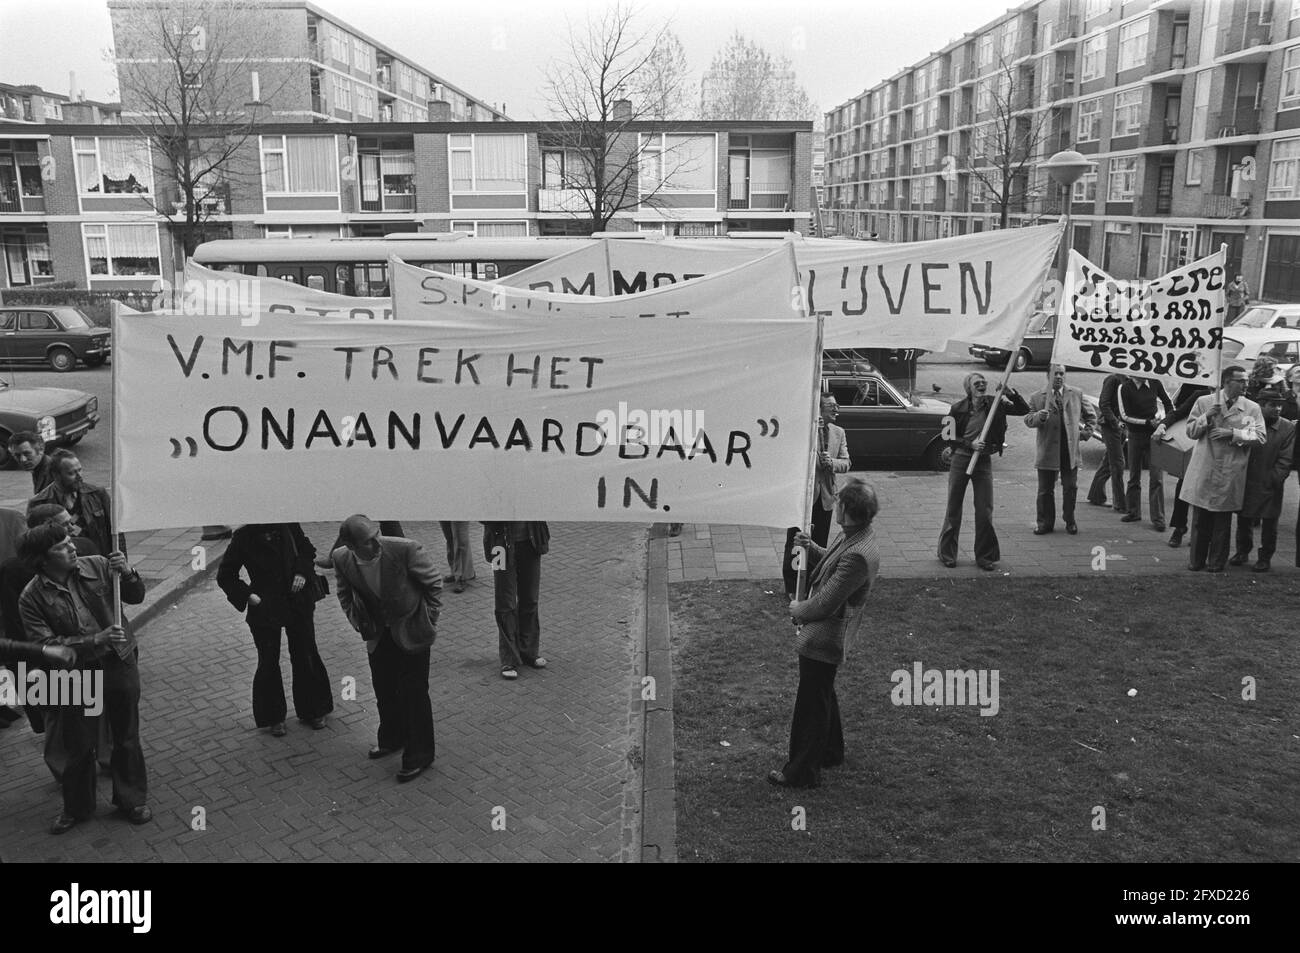 VMF personnel with a banner, March 18, 1977, labor disputes, protests, employees, The Netherlands, 20th century press agency photo, news to remember, documentary, historic photography 1945-1990, visual stories, human history of the Twentieth Century, capturing moments in time Stock Photo